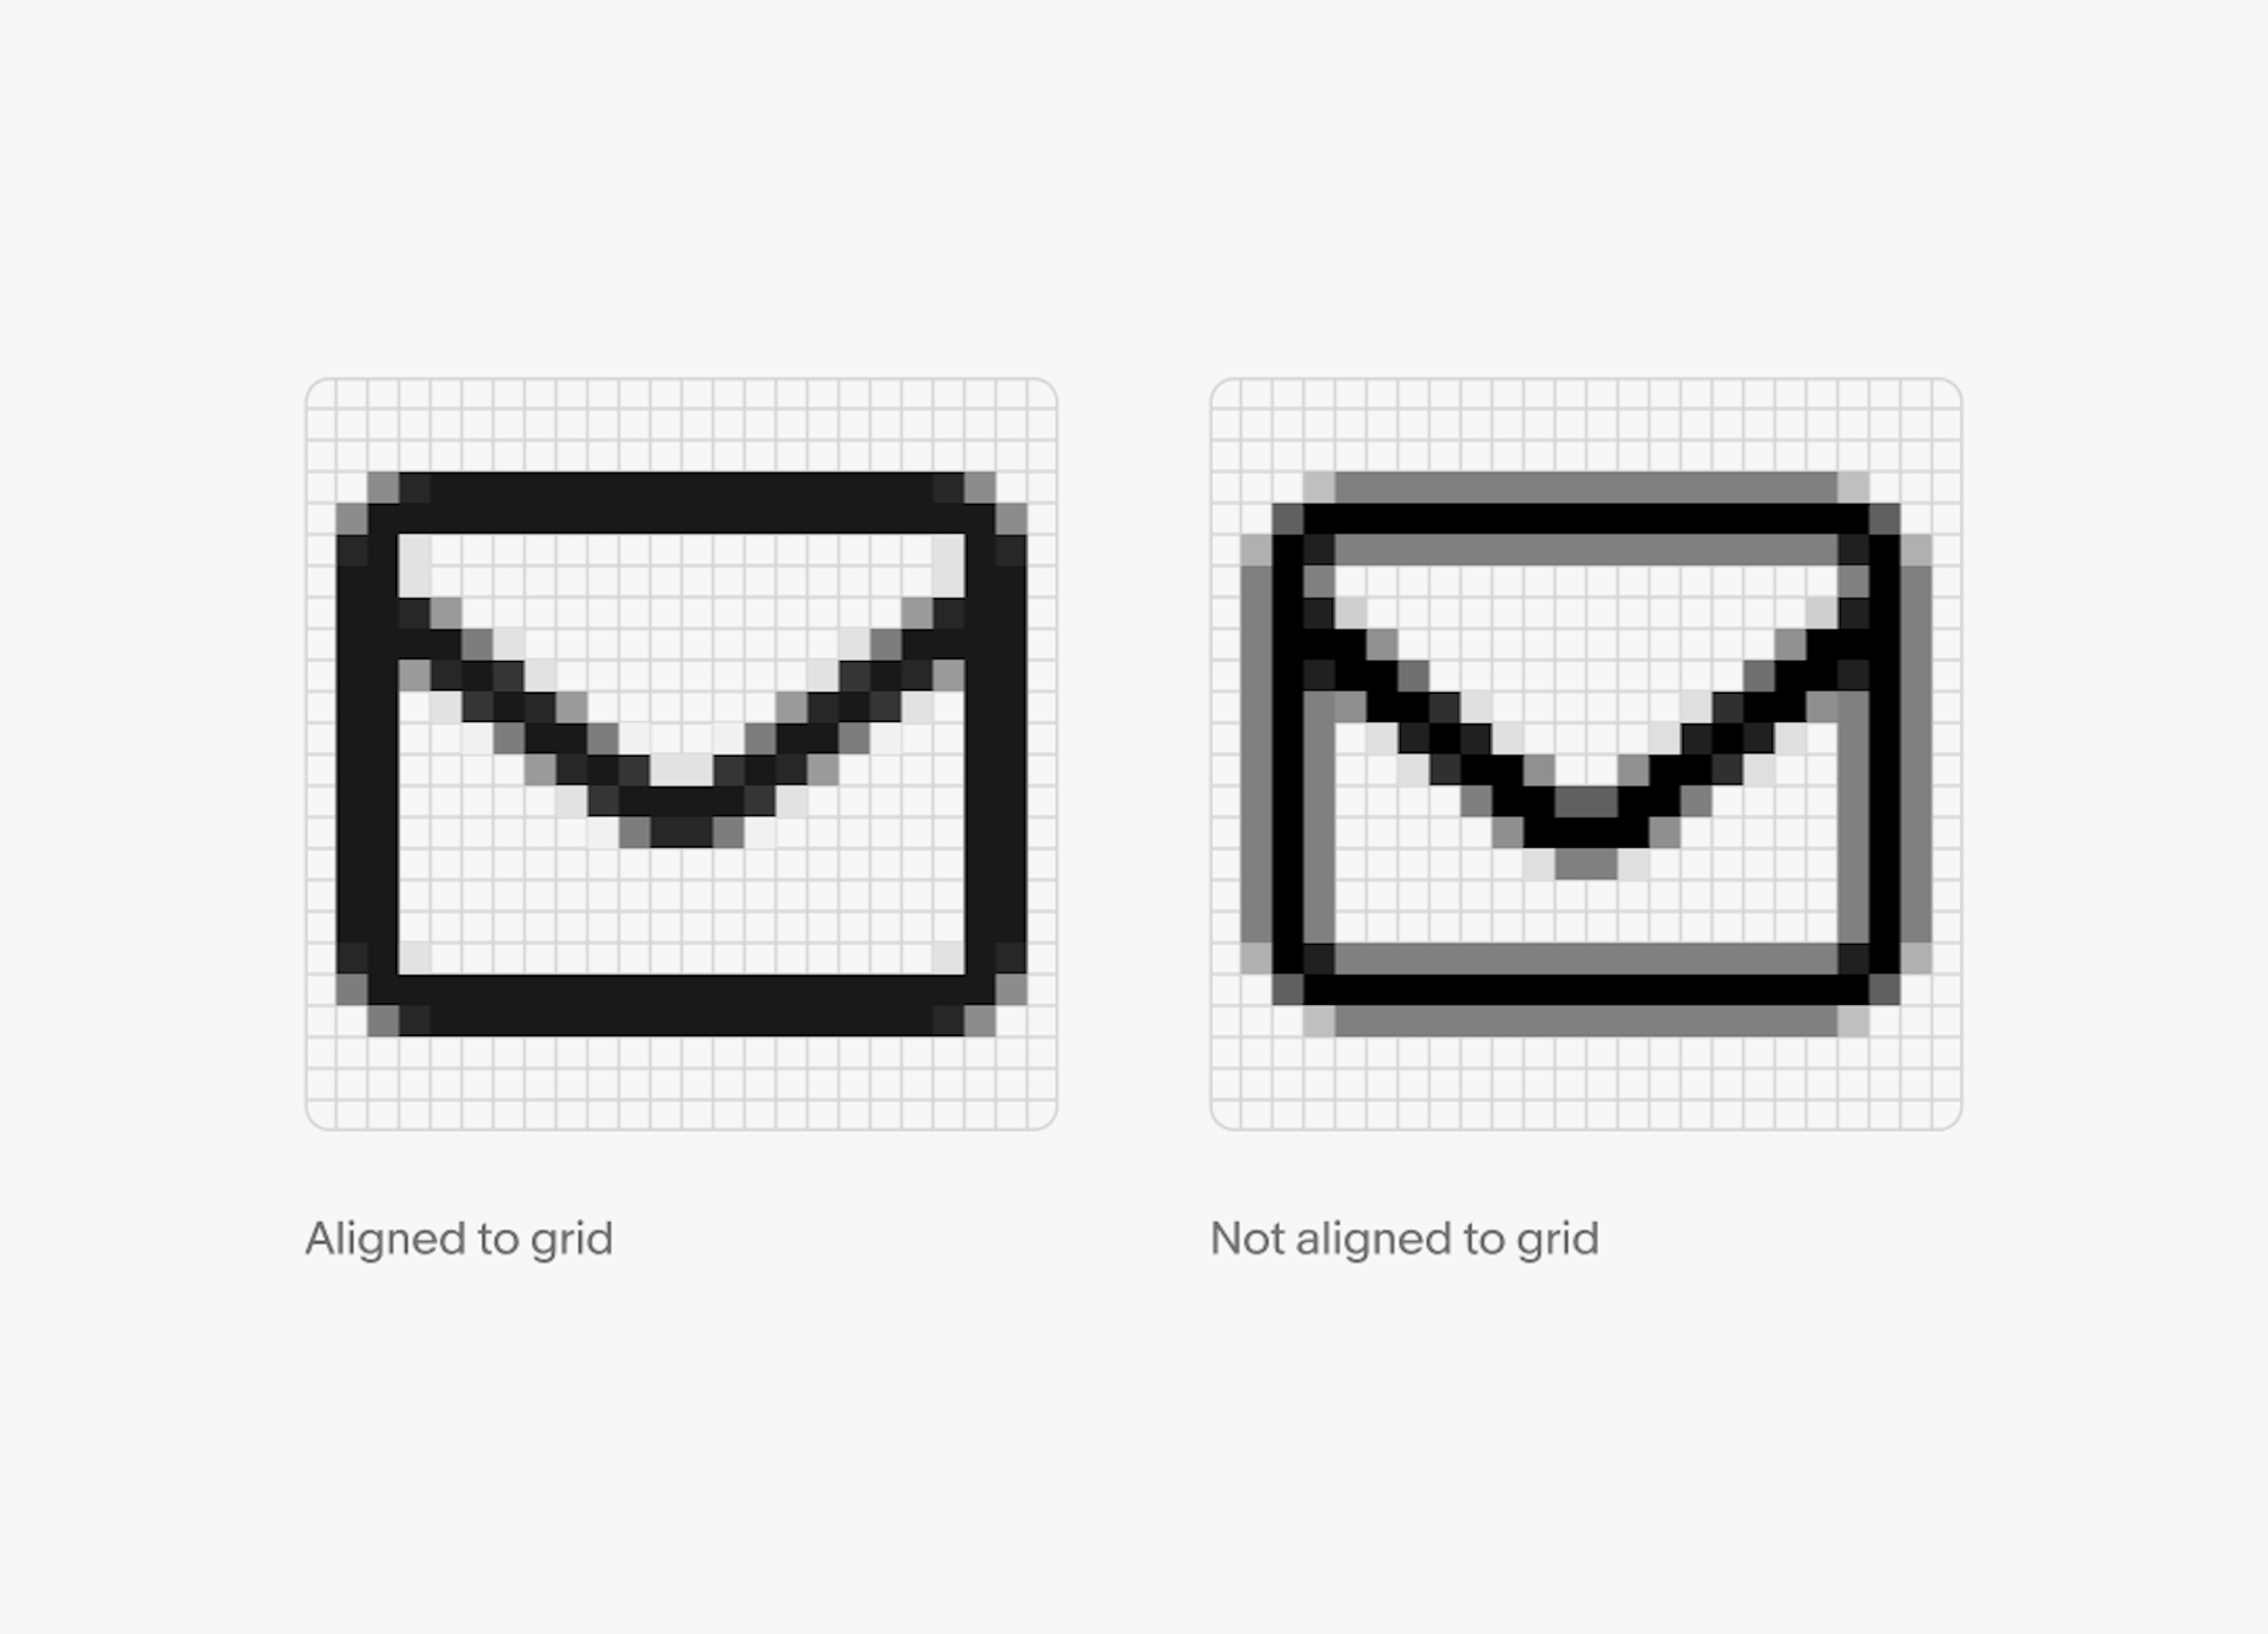 Two mail icons over pixel grids. The left is aligned to the grid and is crisp in detail. The right is misaligned and appears aliased and fuzzy.